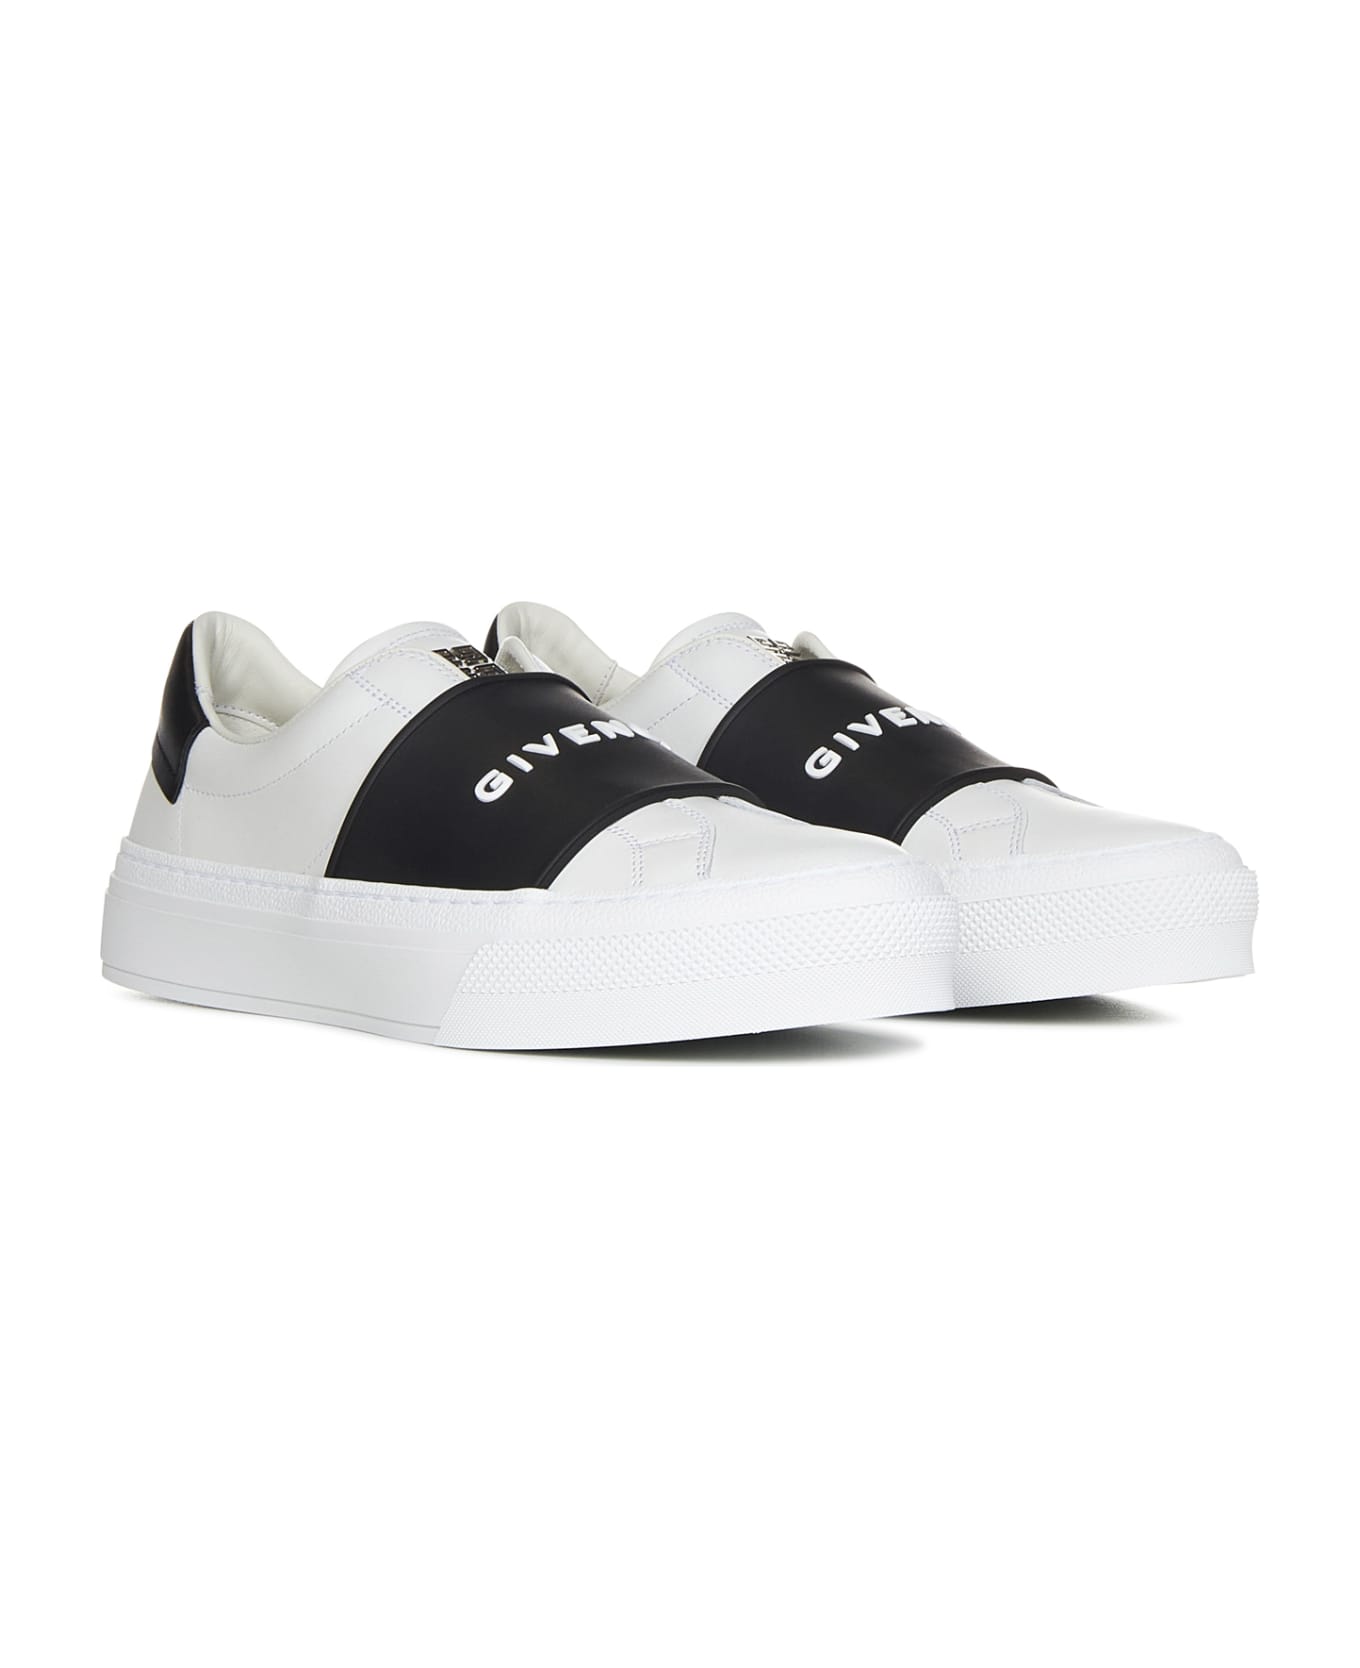 Givenchy City Sport Sneakers - White Black